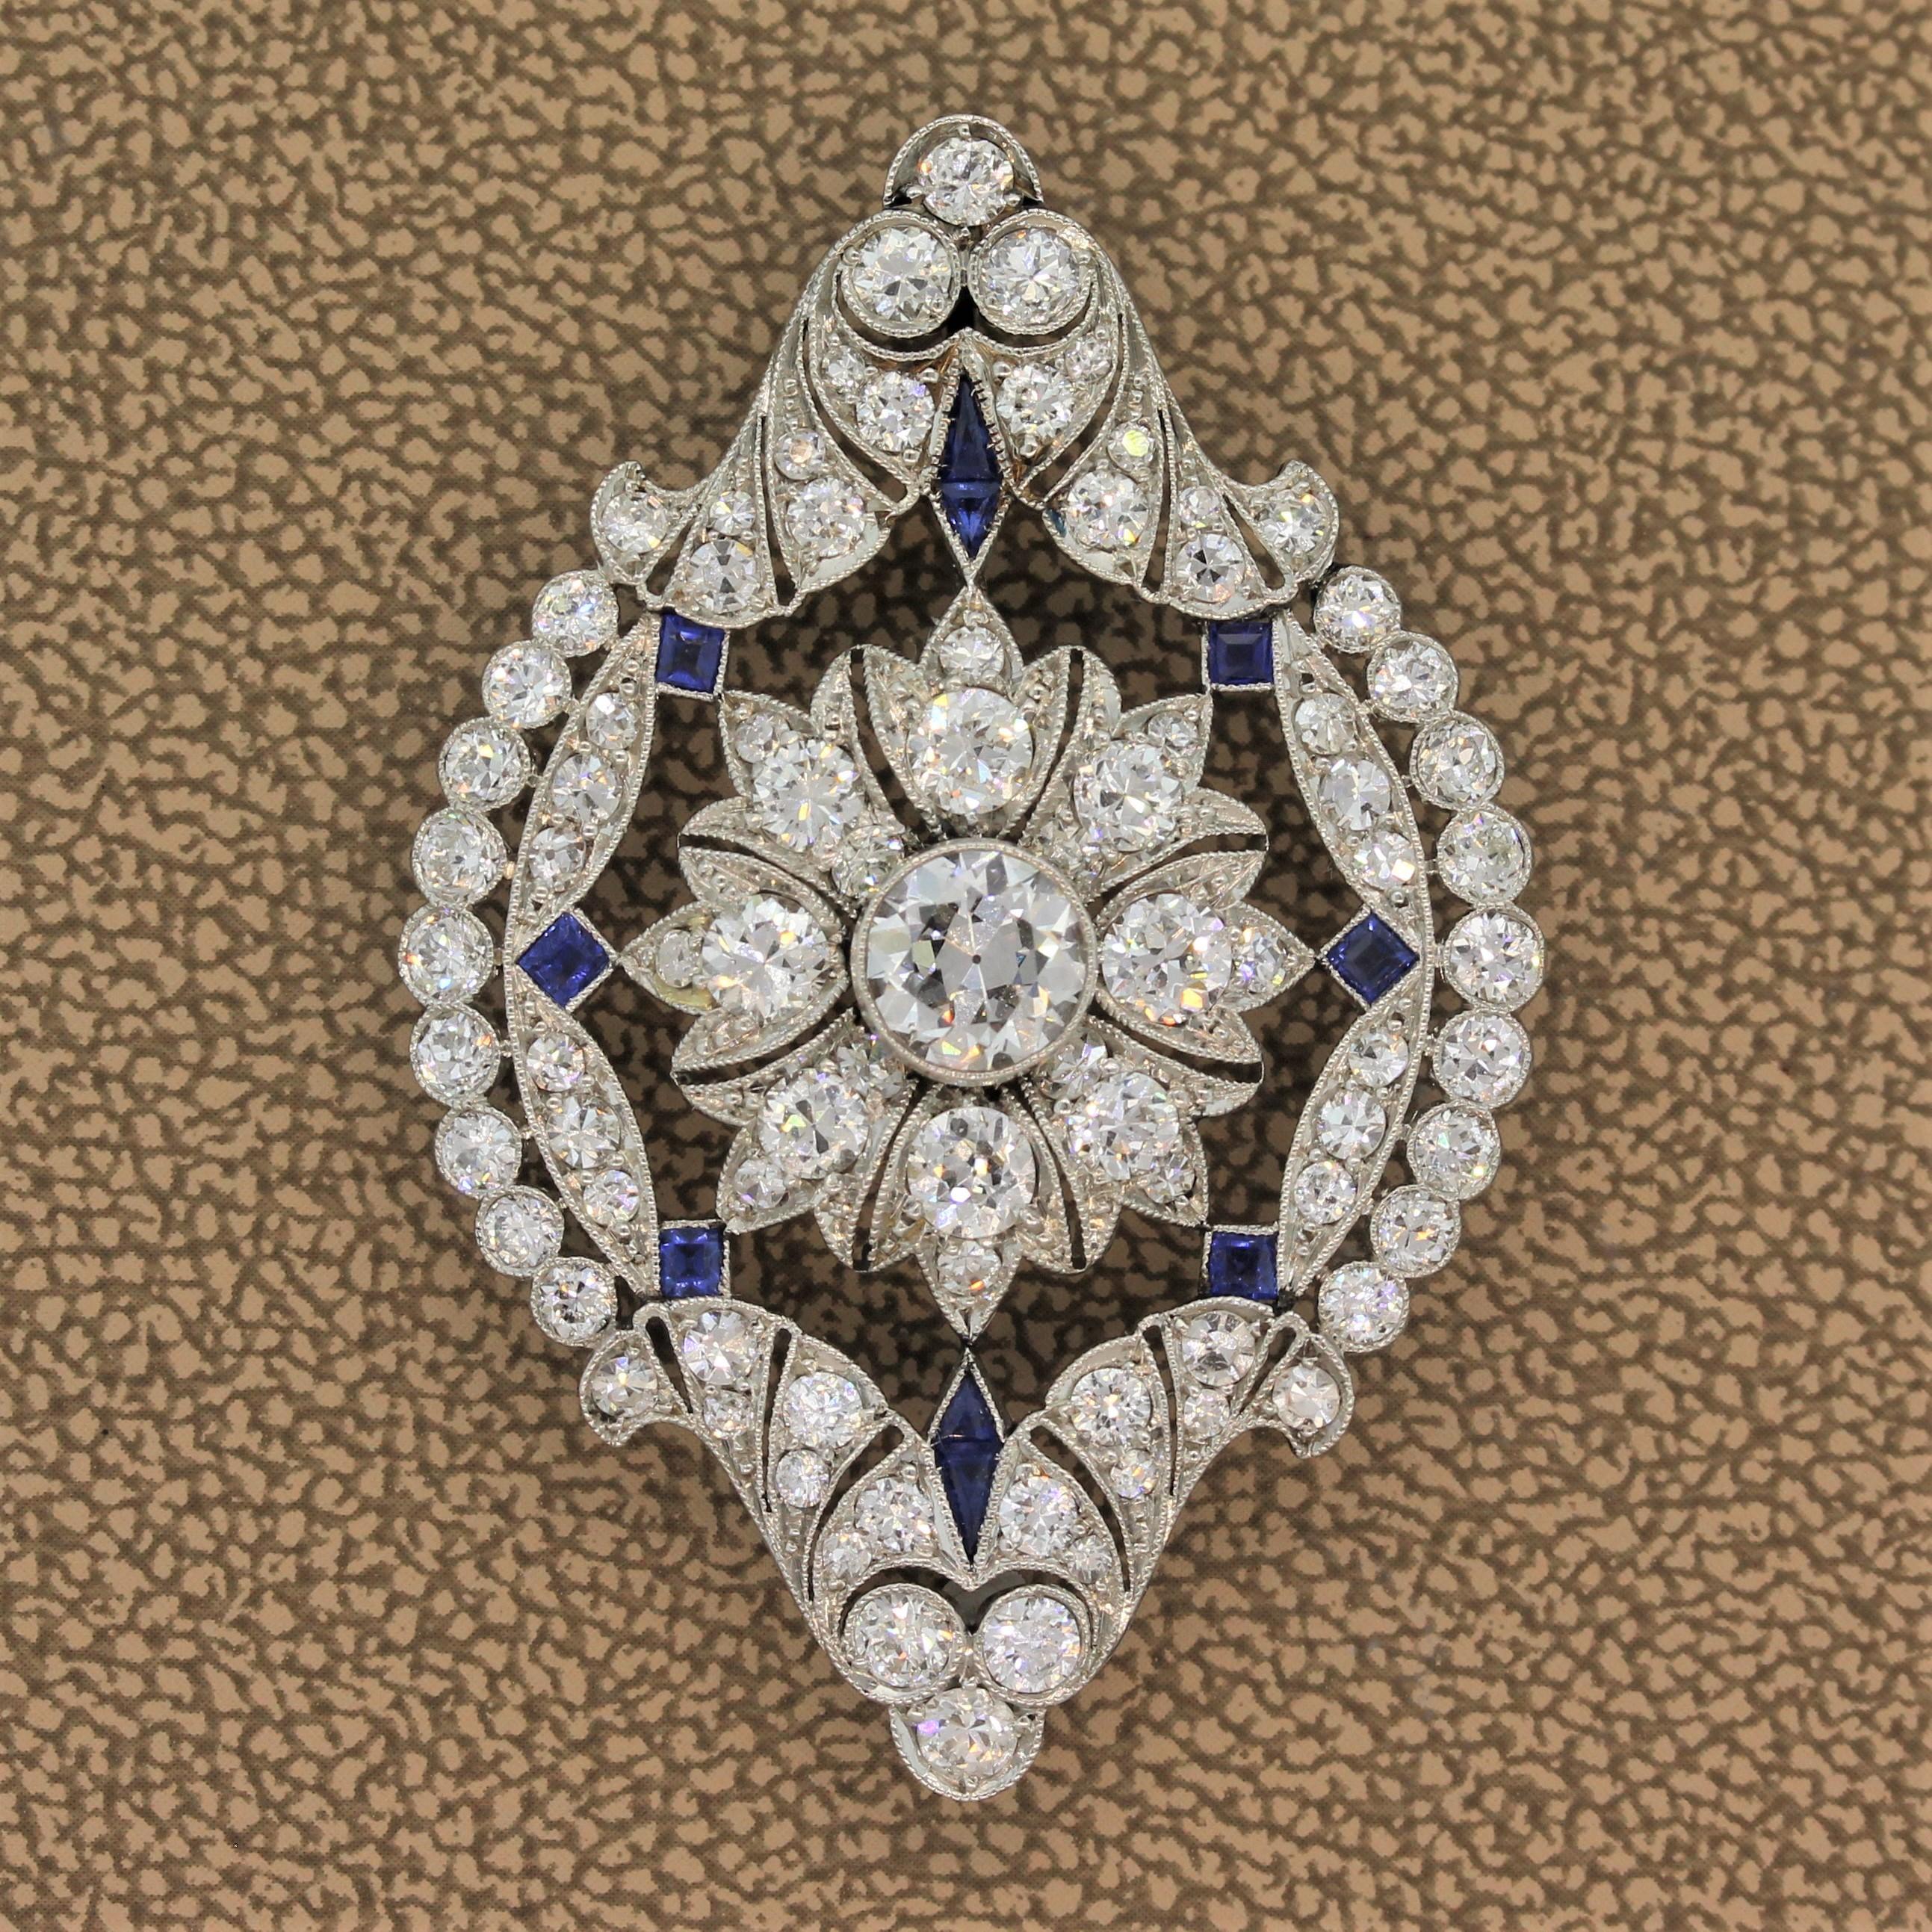 An exceptional pendant from the 1920’s featuring a 0.90 carat center diamond with an additional 3 carats diamonds throughout the pendant. Adding color to the piece are 0.50 carats precision cut of blue sapphires. A classic Art Deco with geometric